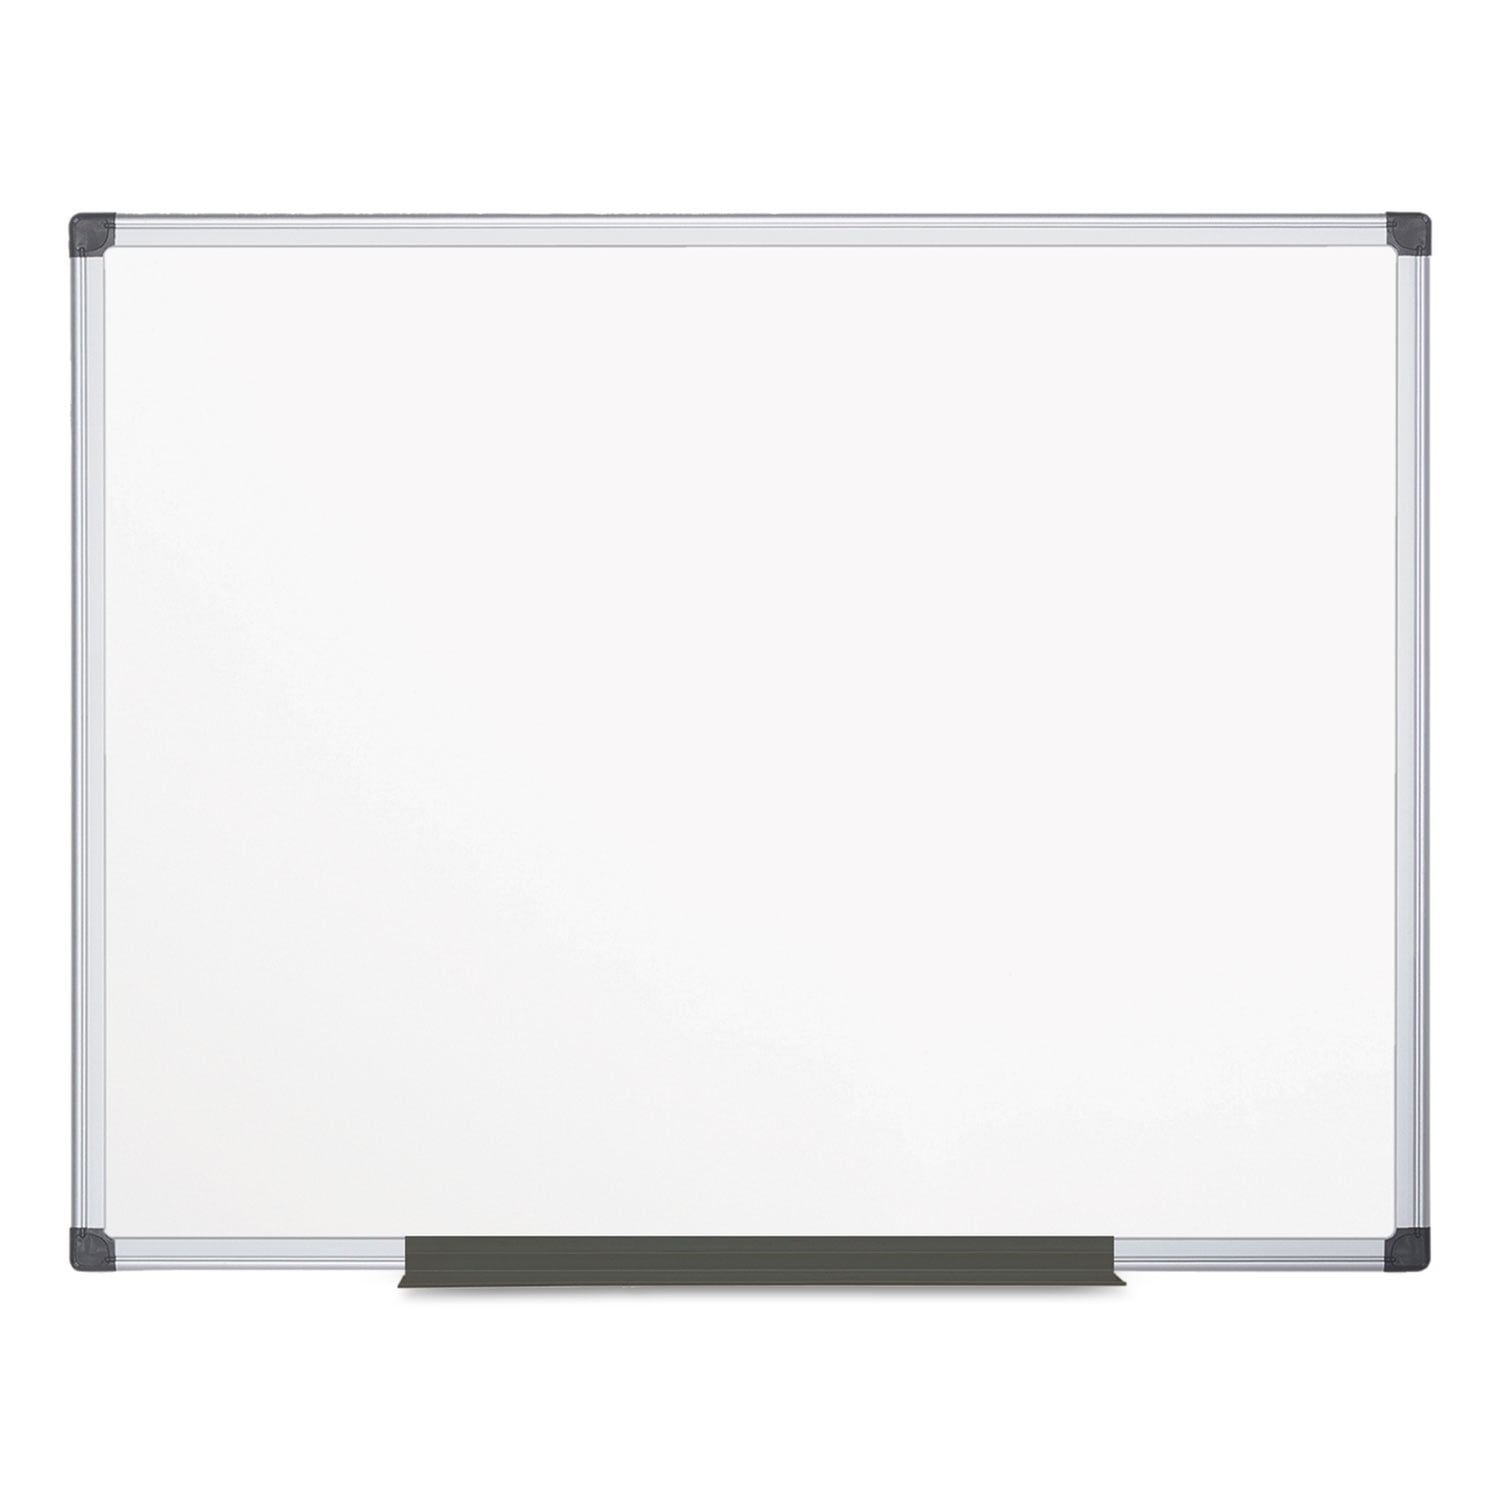 Low Profile Magnetic Dry Erase White Boards by RitePlus